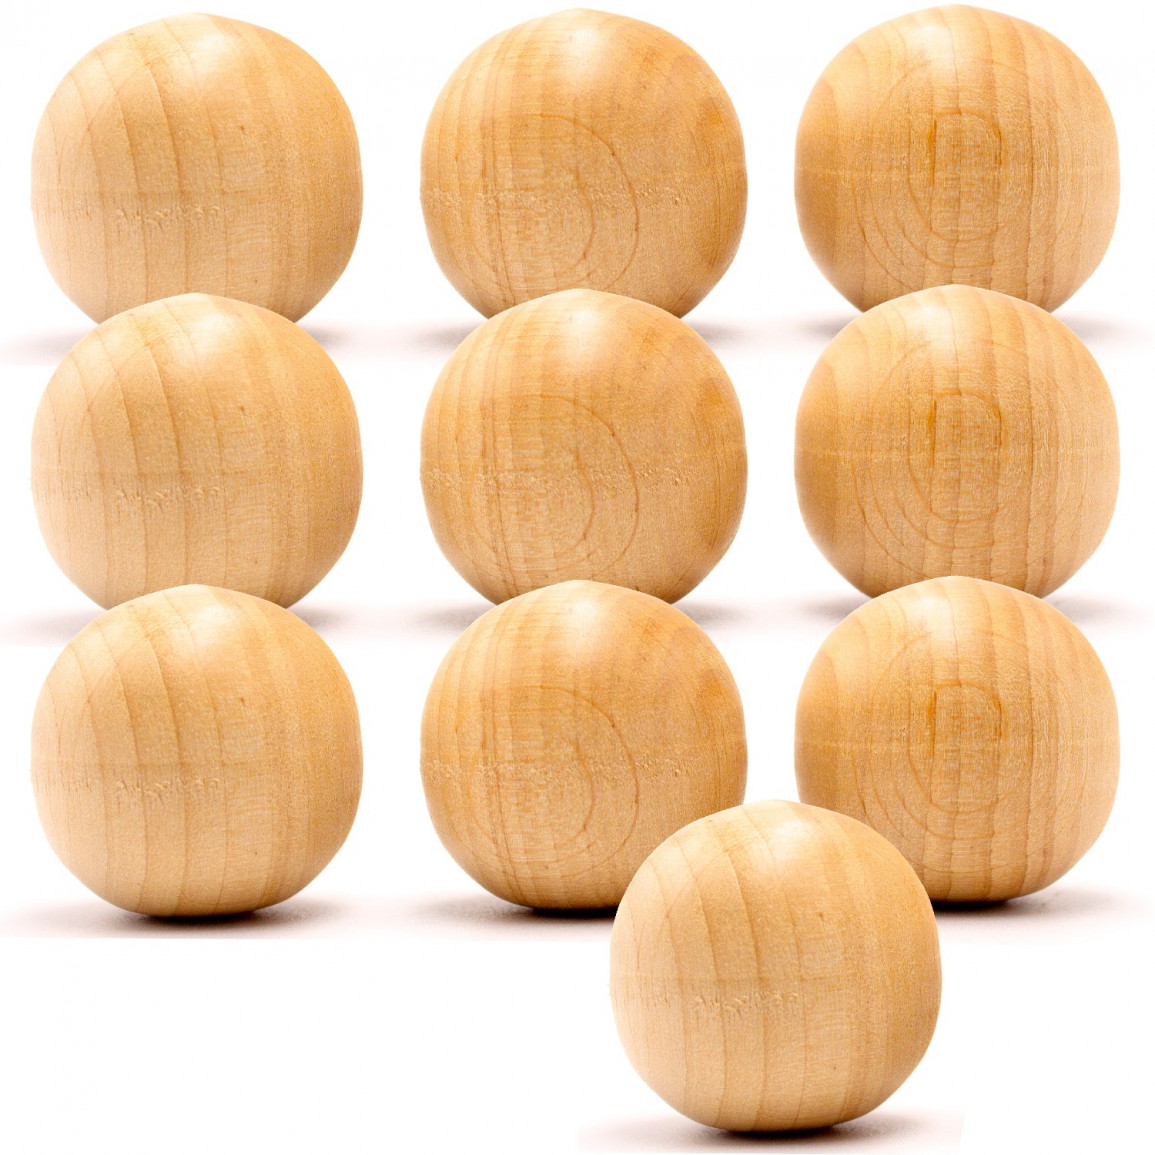 Round Wooden Ball, Bag of Wood Round Ball, Small Wooden Balls, for